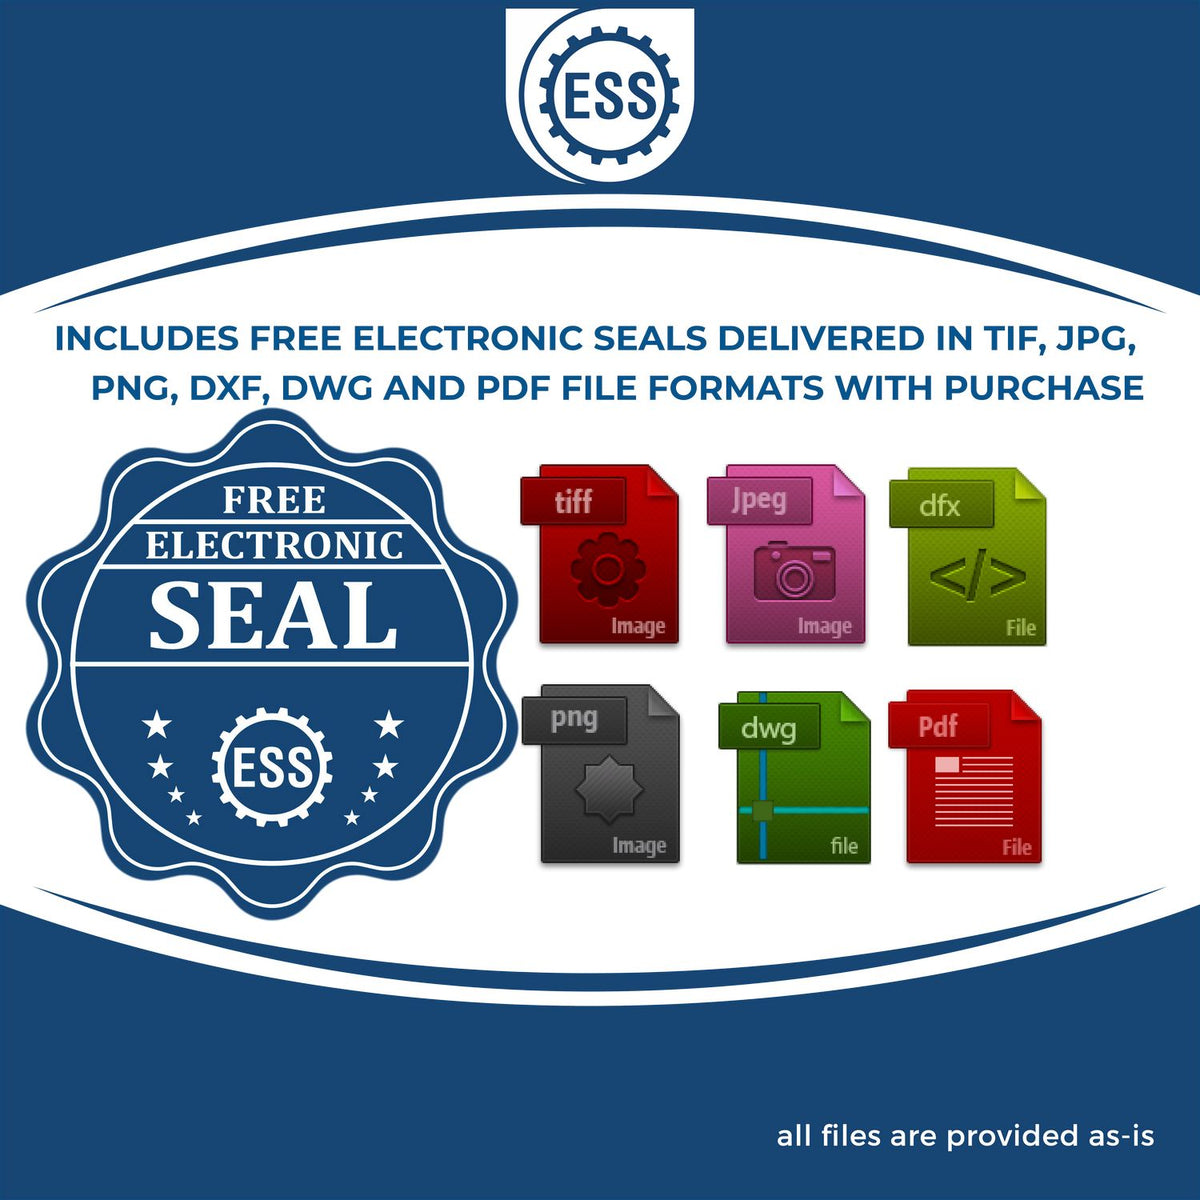 An infographic for the free electronic seal for the Premium MaxLight Pre-Inked Nevada Engineering Stamp illustrating the different file type icons such as DXF, DWG, TIF, JPG and PNG.